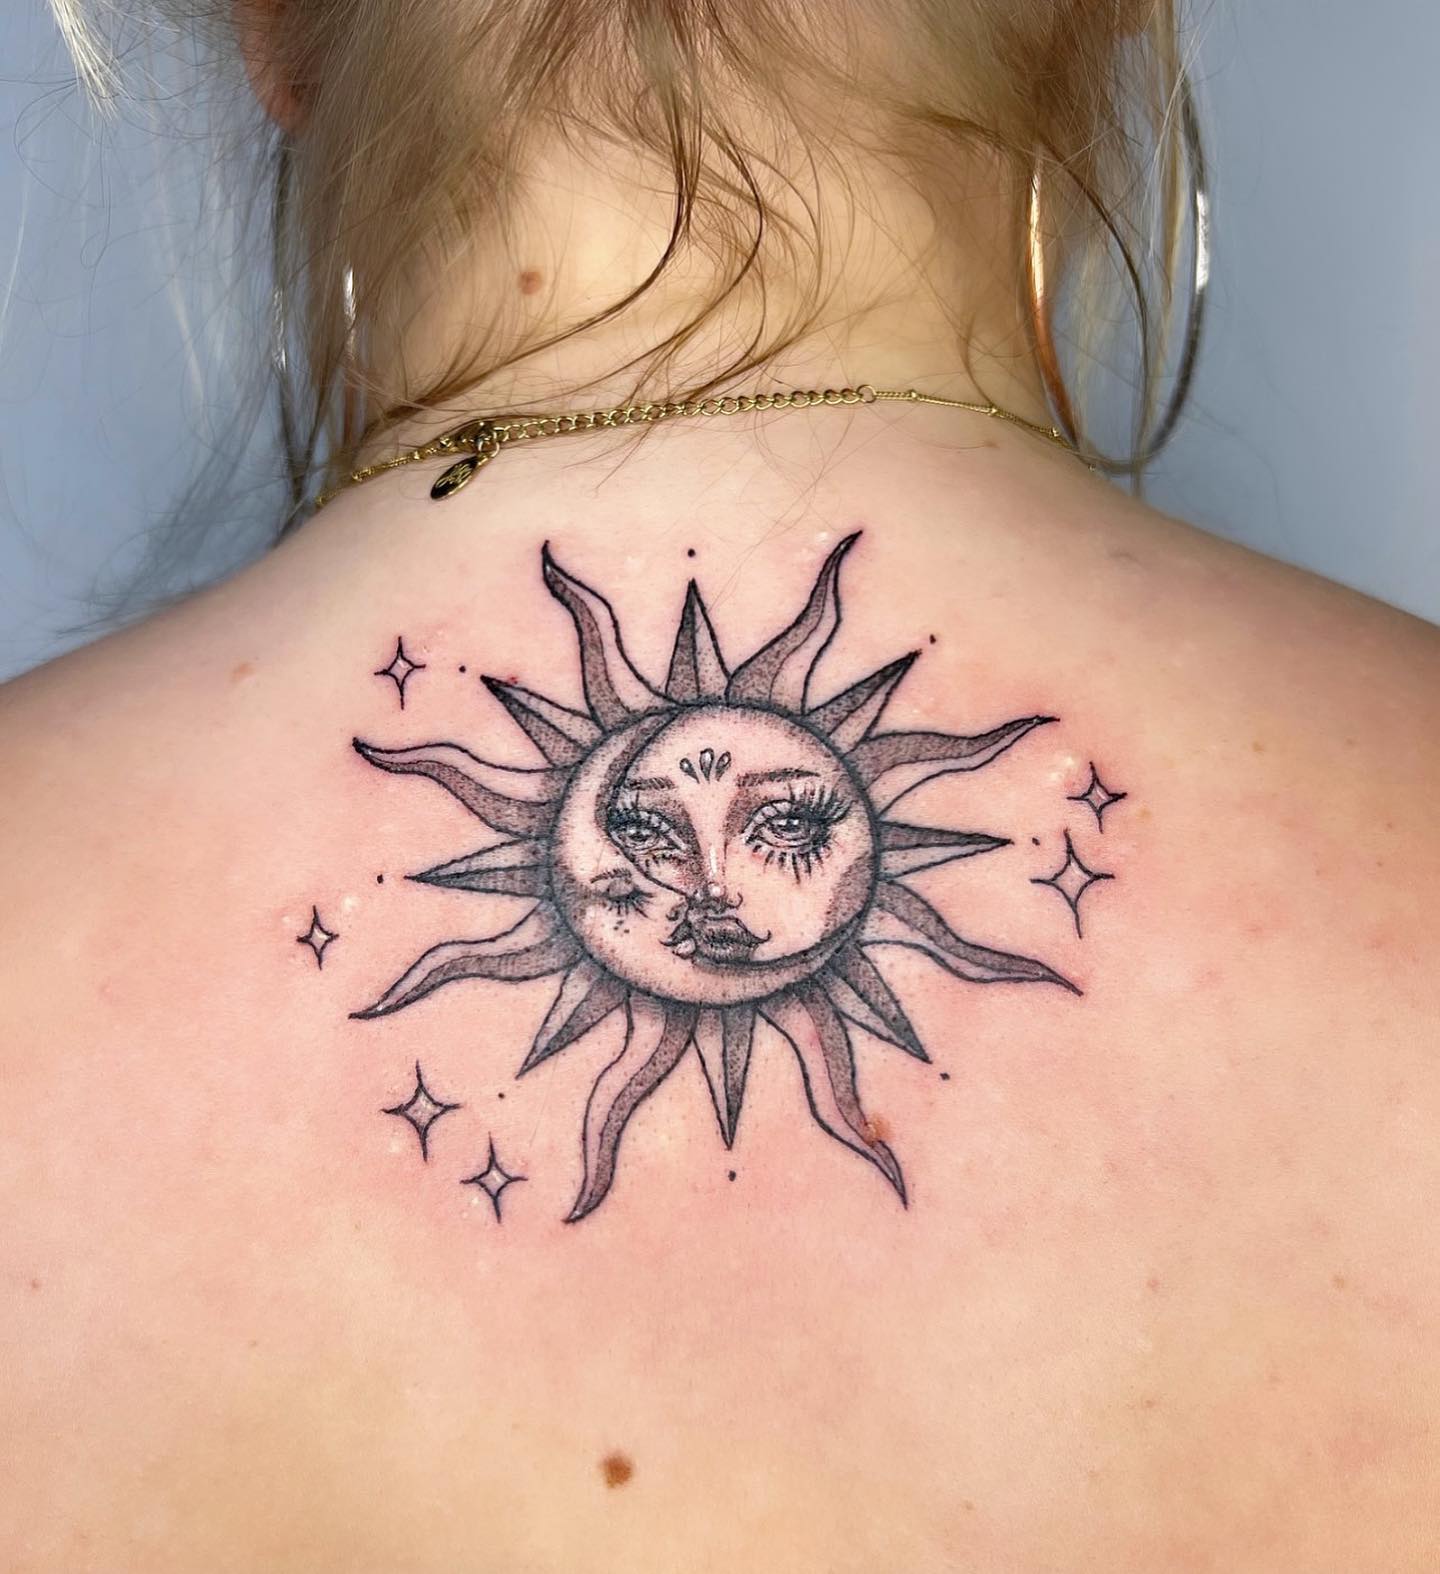 The sun tattoo over your back will symbolize your inner warmth and bright personality.